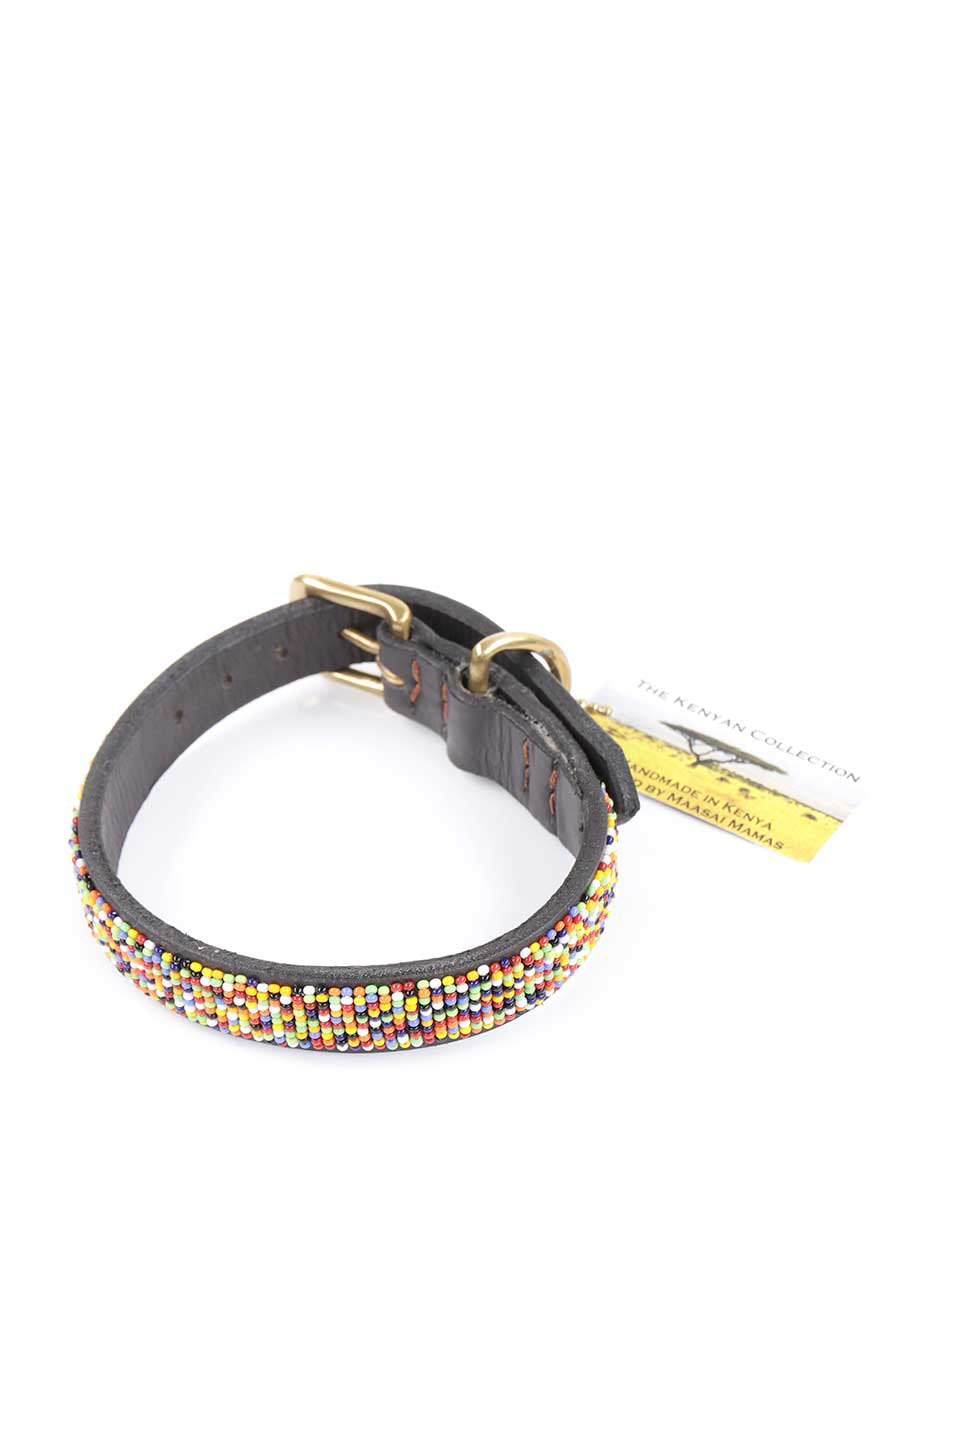 Confetti Beaded Dog Collar 12" コンフェッティ・ビーズドッグカラー / by THE KENYAN COLLECTION